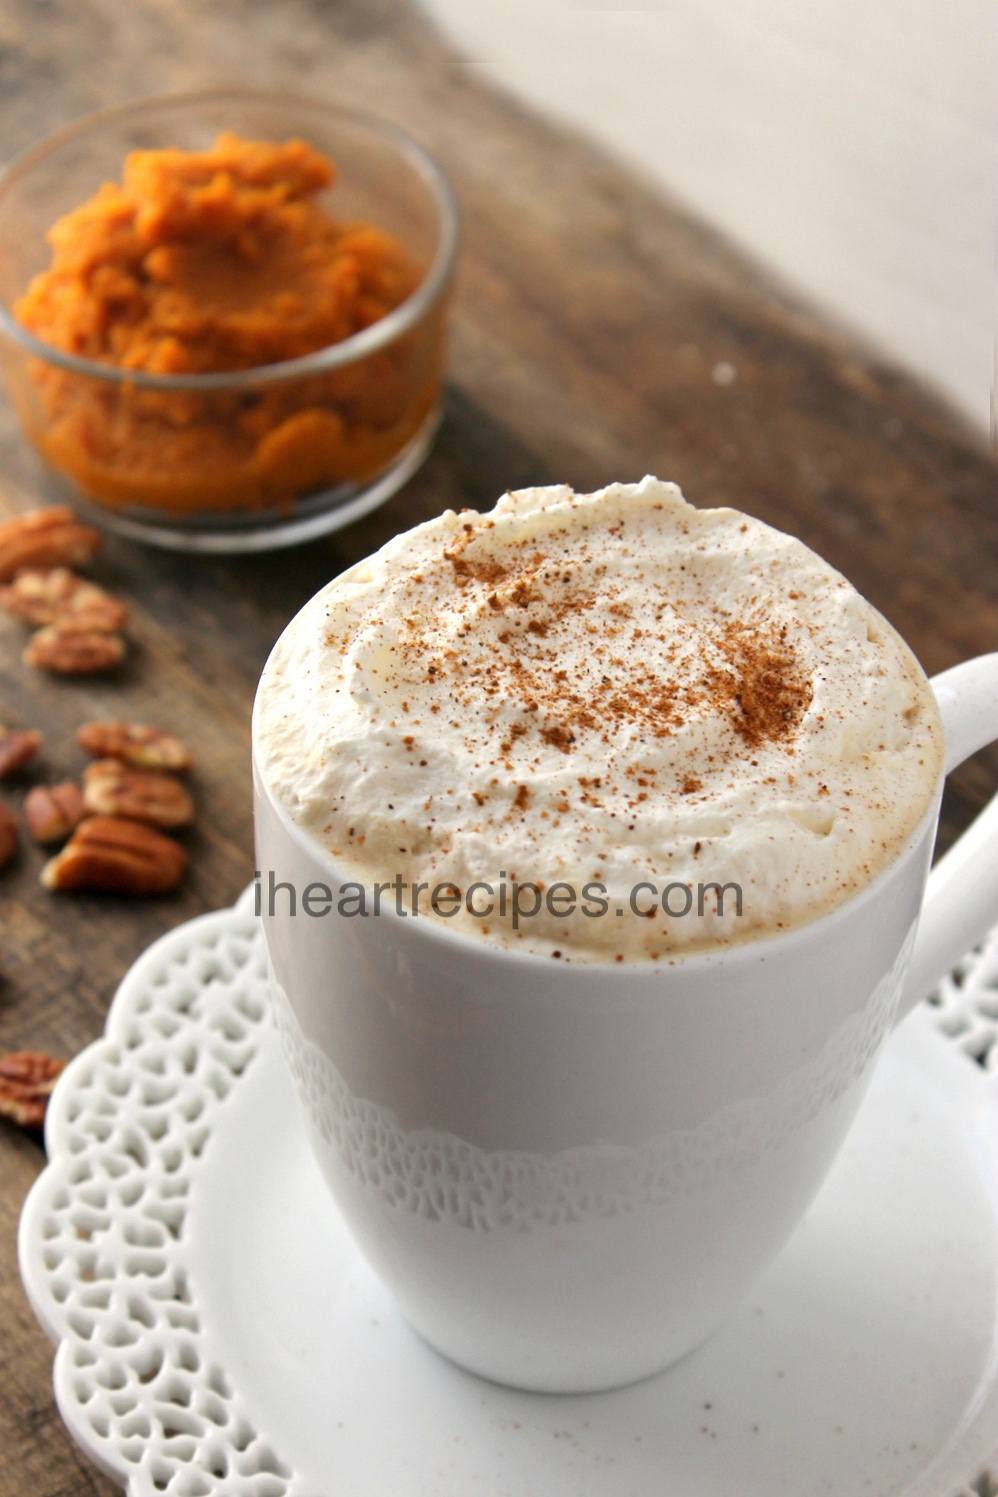 Learn how to make the popular pumpkin spice latte at home!